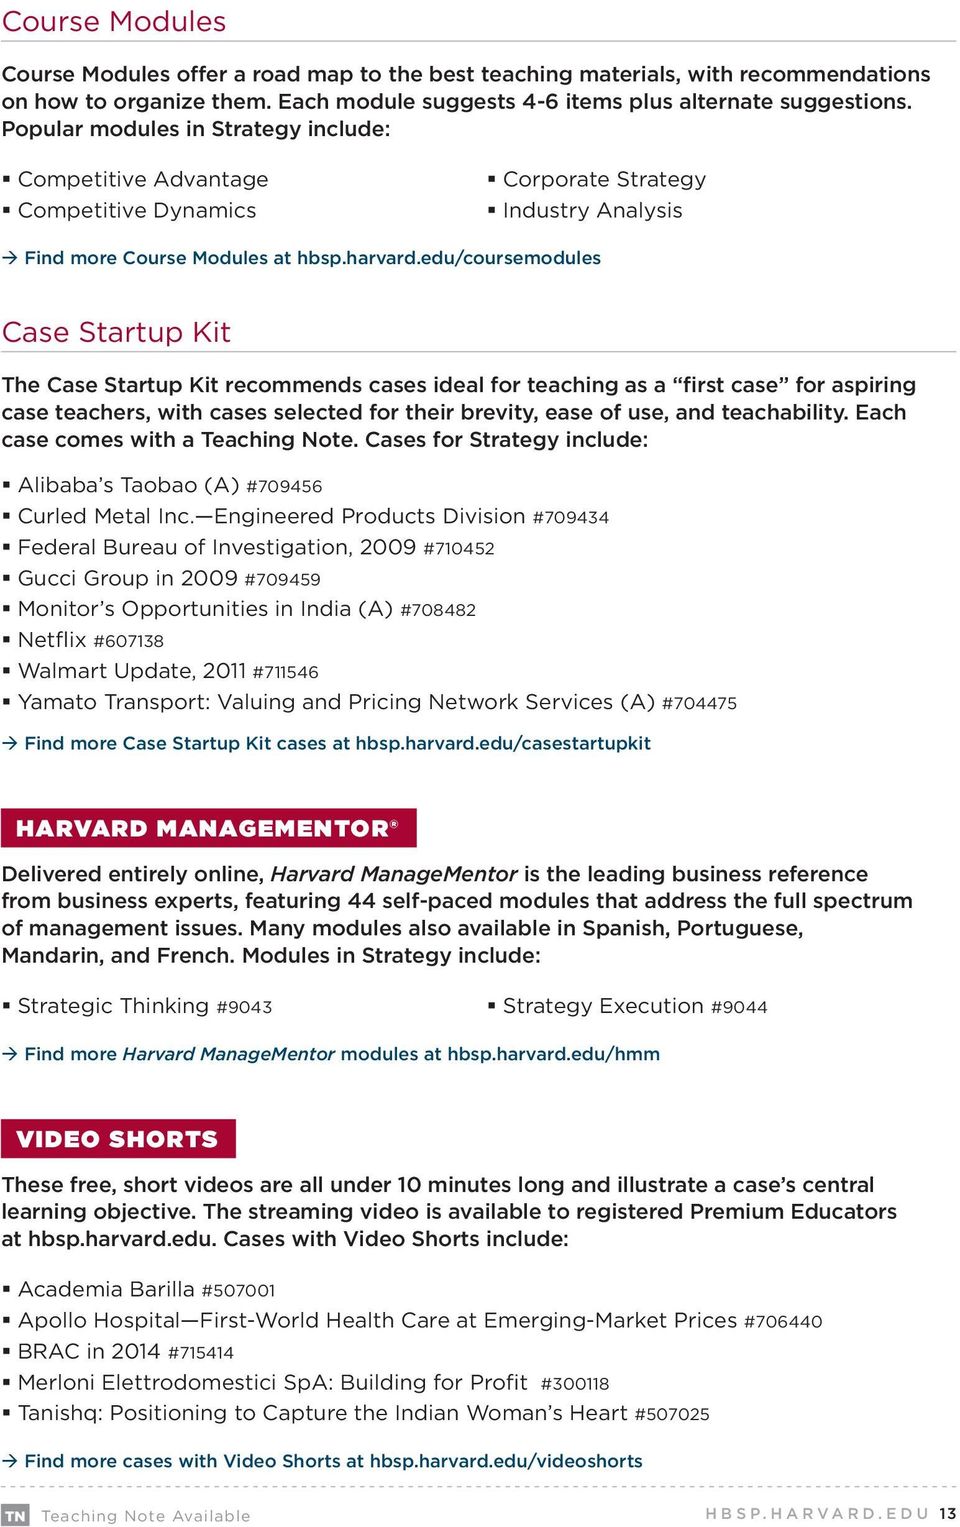 strategy  articles books  u0026 chapters cases core curriculum